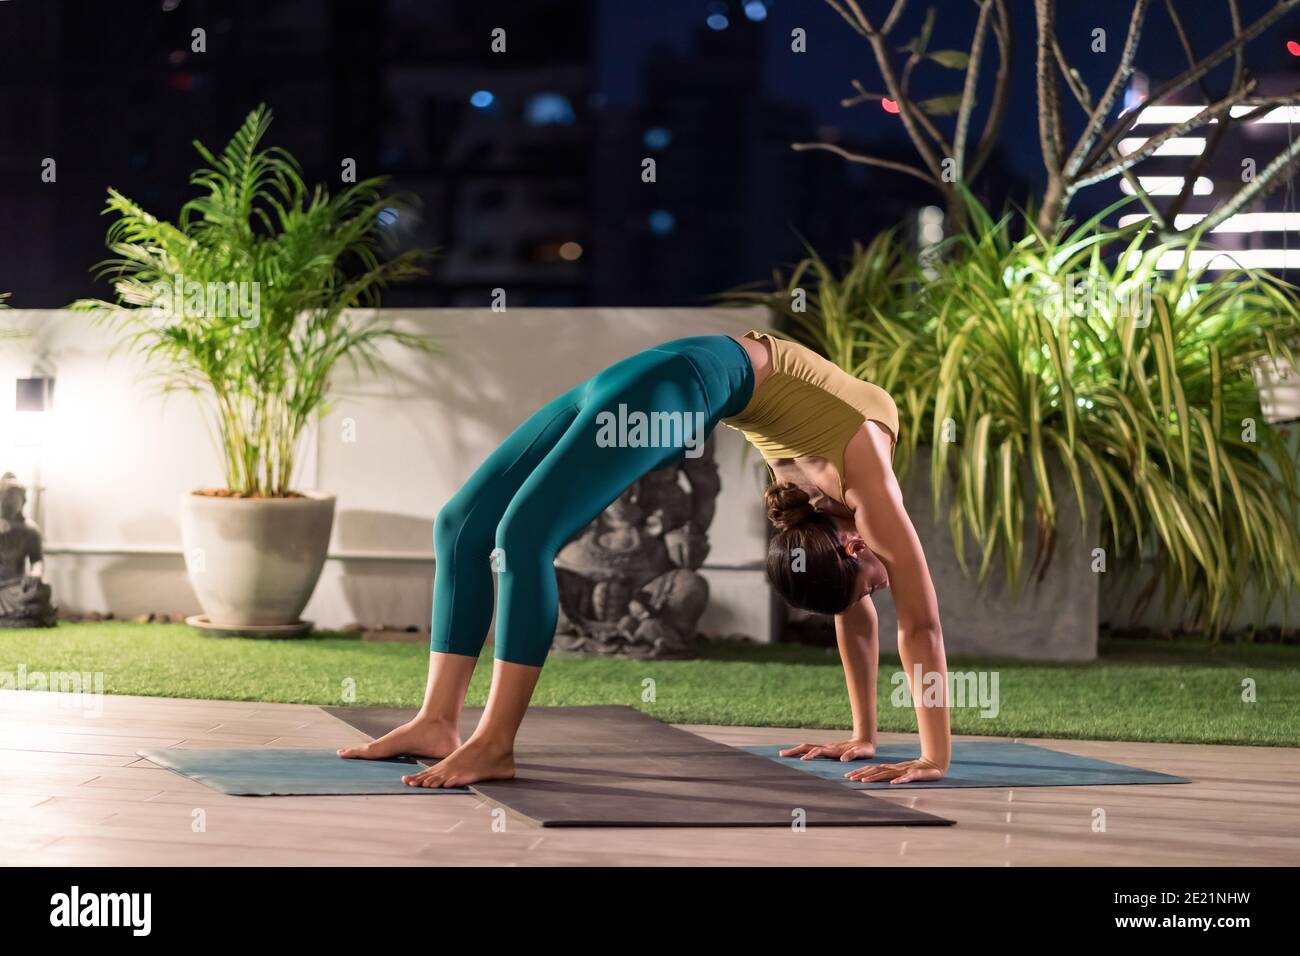 Asian female woman in sportswear bra pants practicing yoga during city lockdown alone in her apratment with background of cityscape illumination at ni Stock Photo